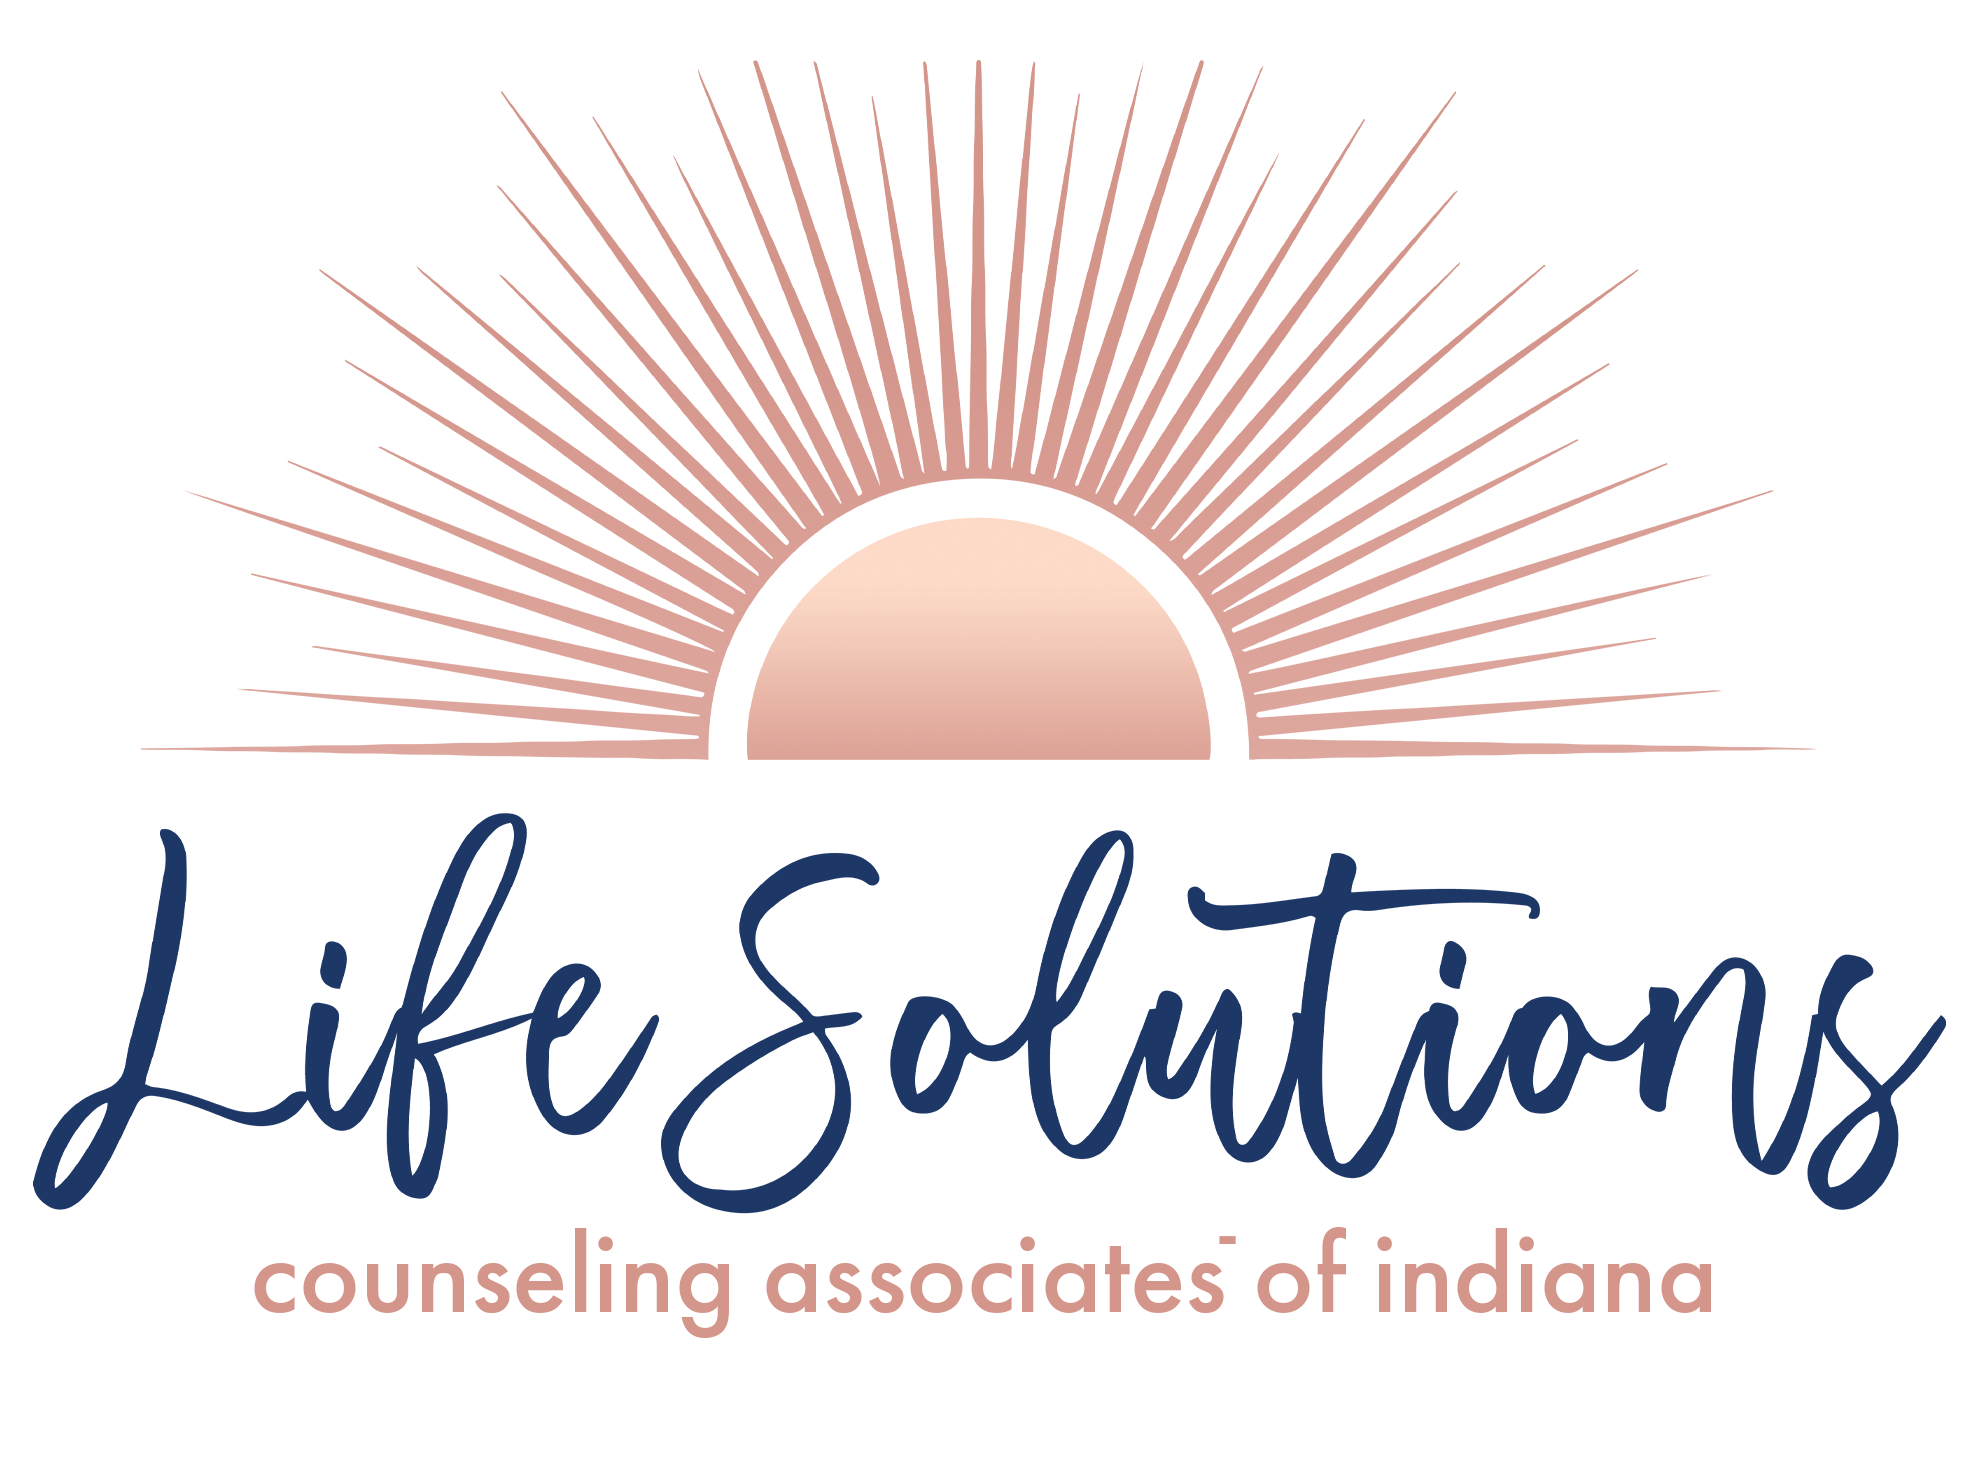 LifeSolutions Counseling Associates of Indiana